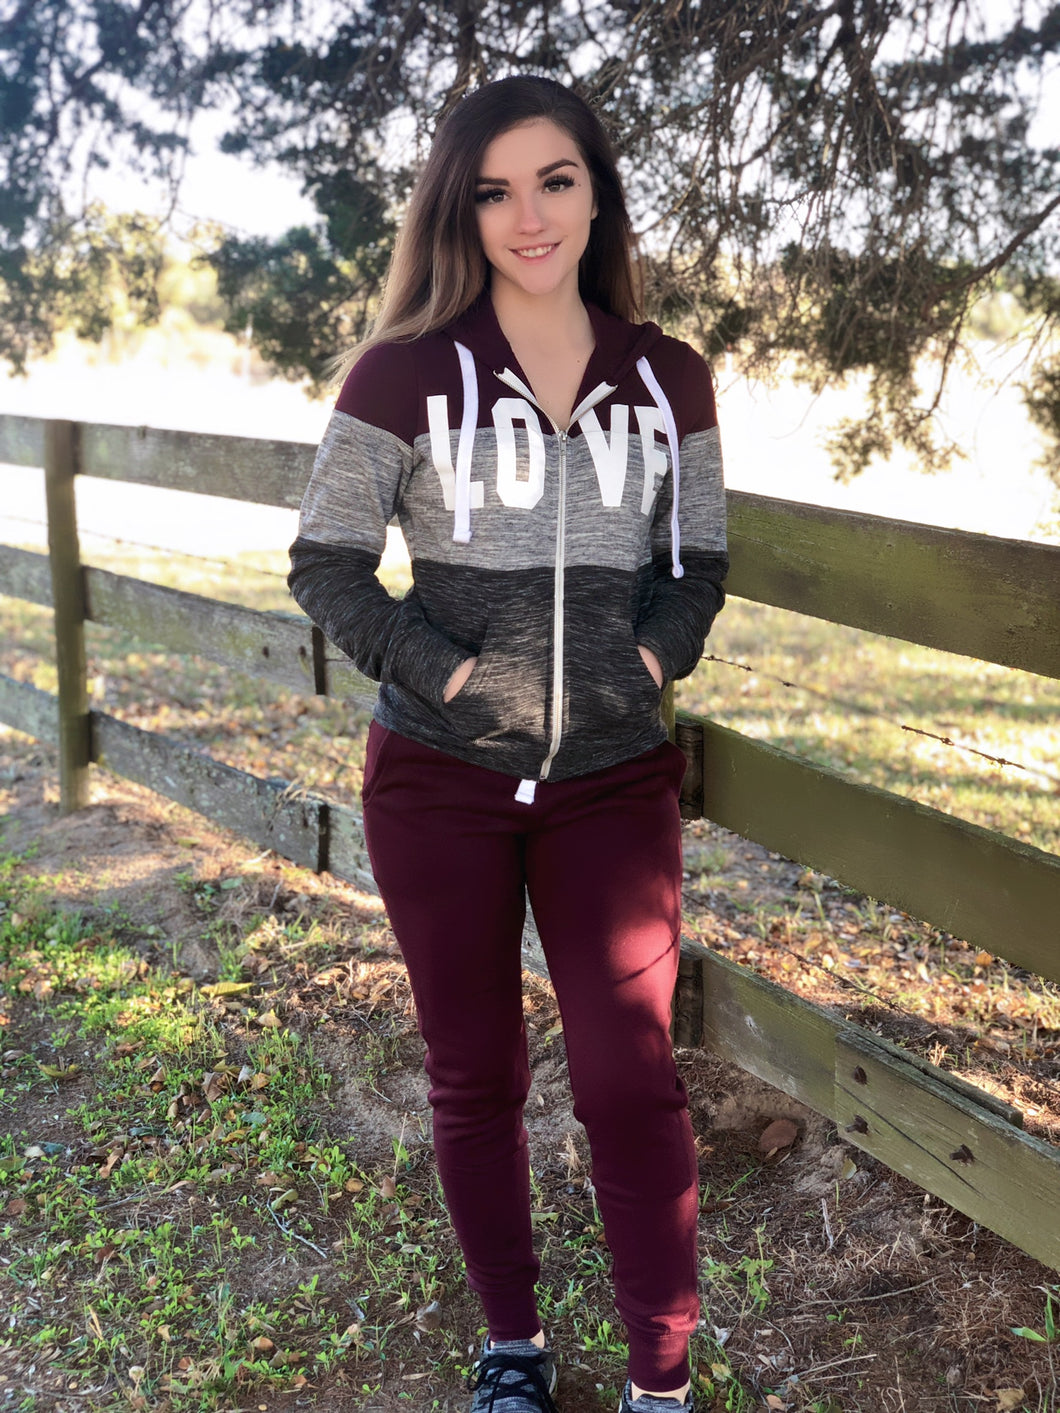 Maroon 3 Block Love Zip Up Hooded Jacket with Joggers - 2PC SET